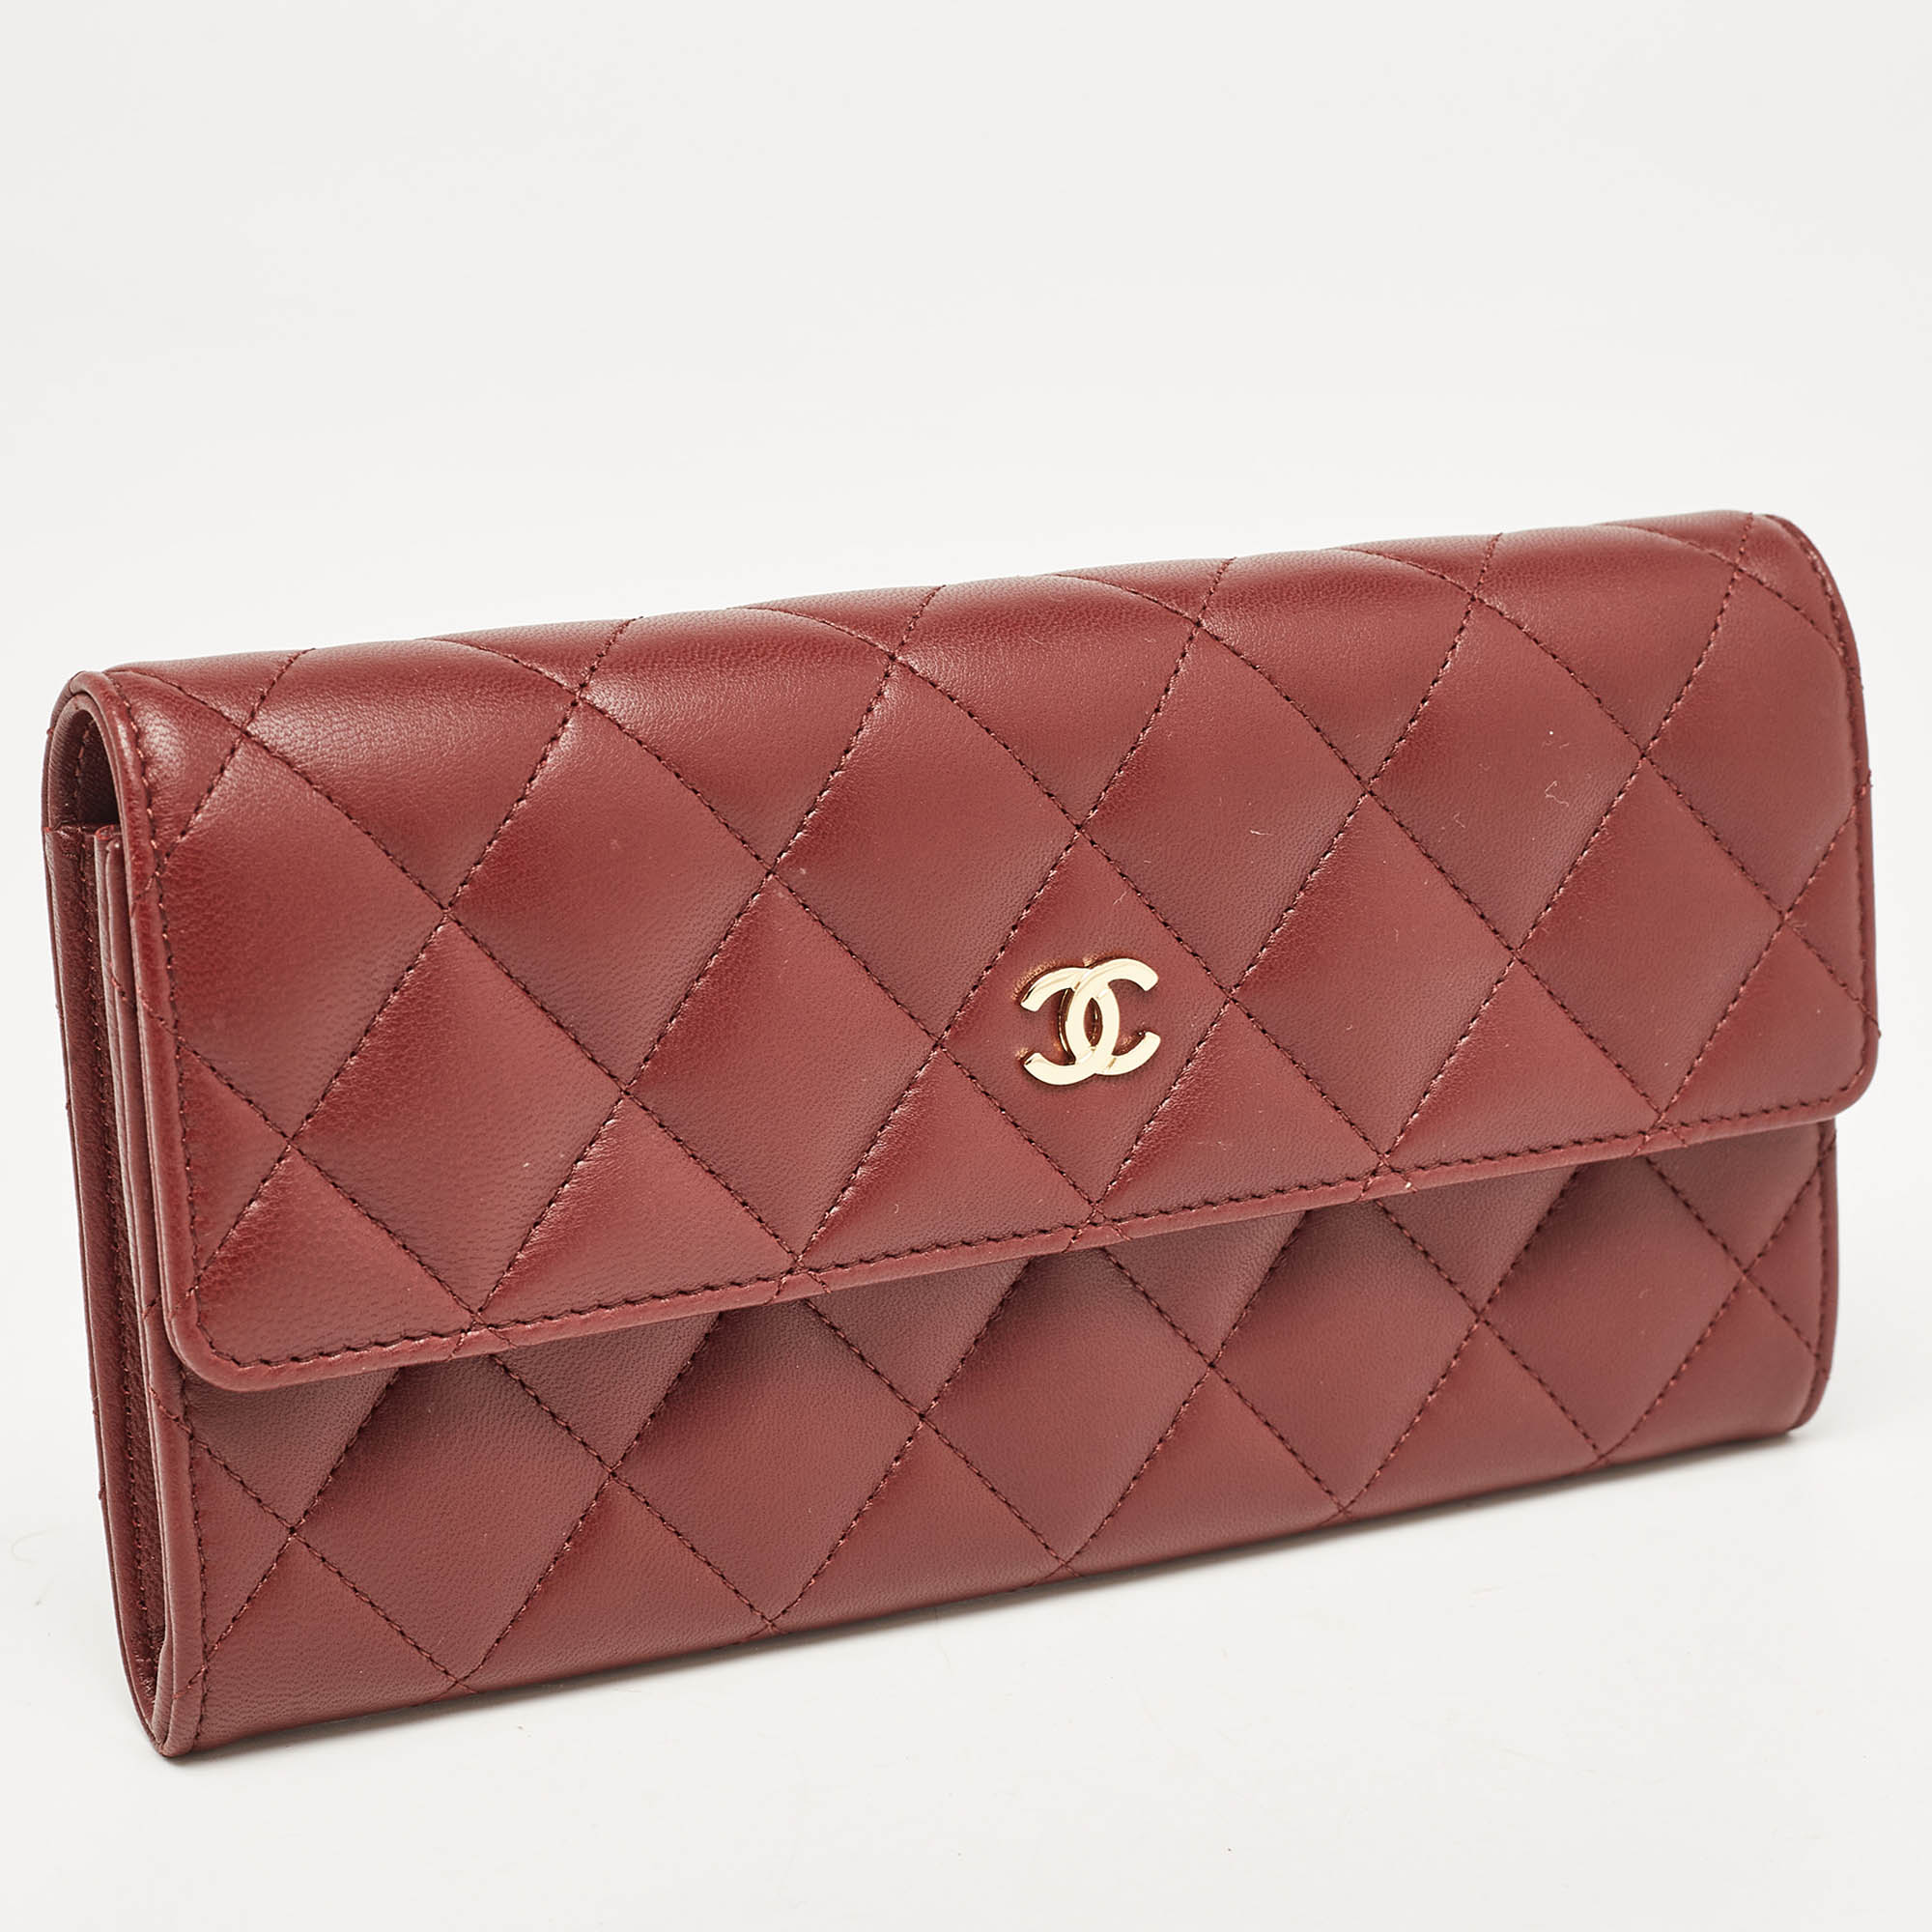 Chanel Red Quilted Leather CC Flap Wallet